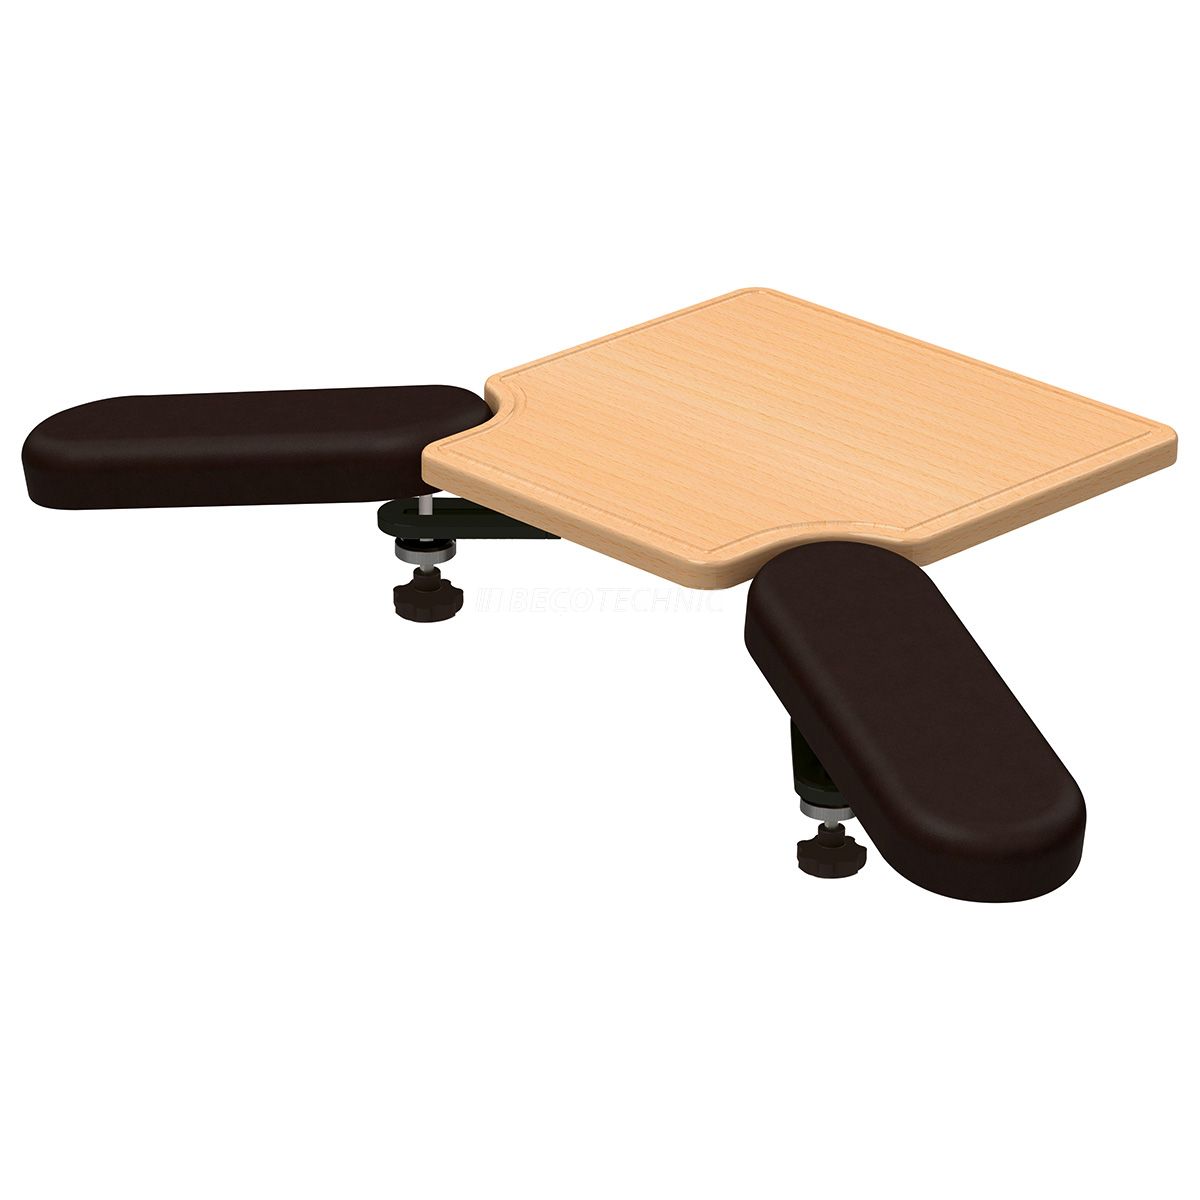 Bergeon 7880-S board with armrests